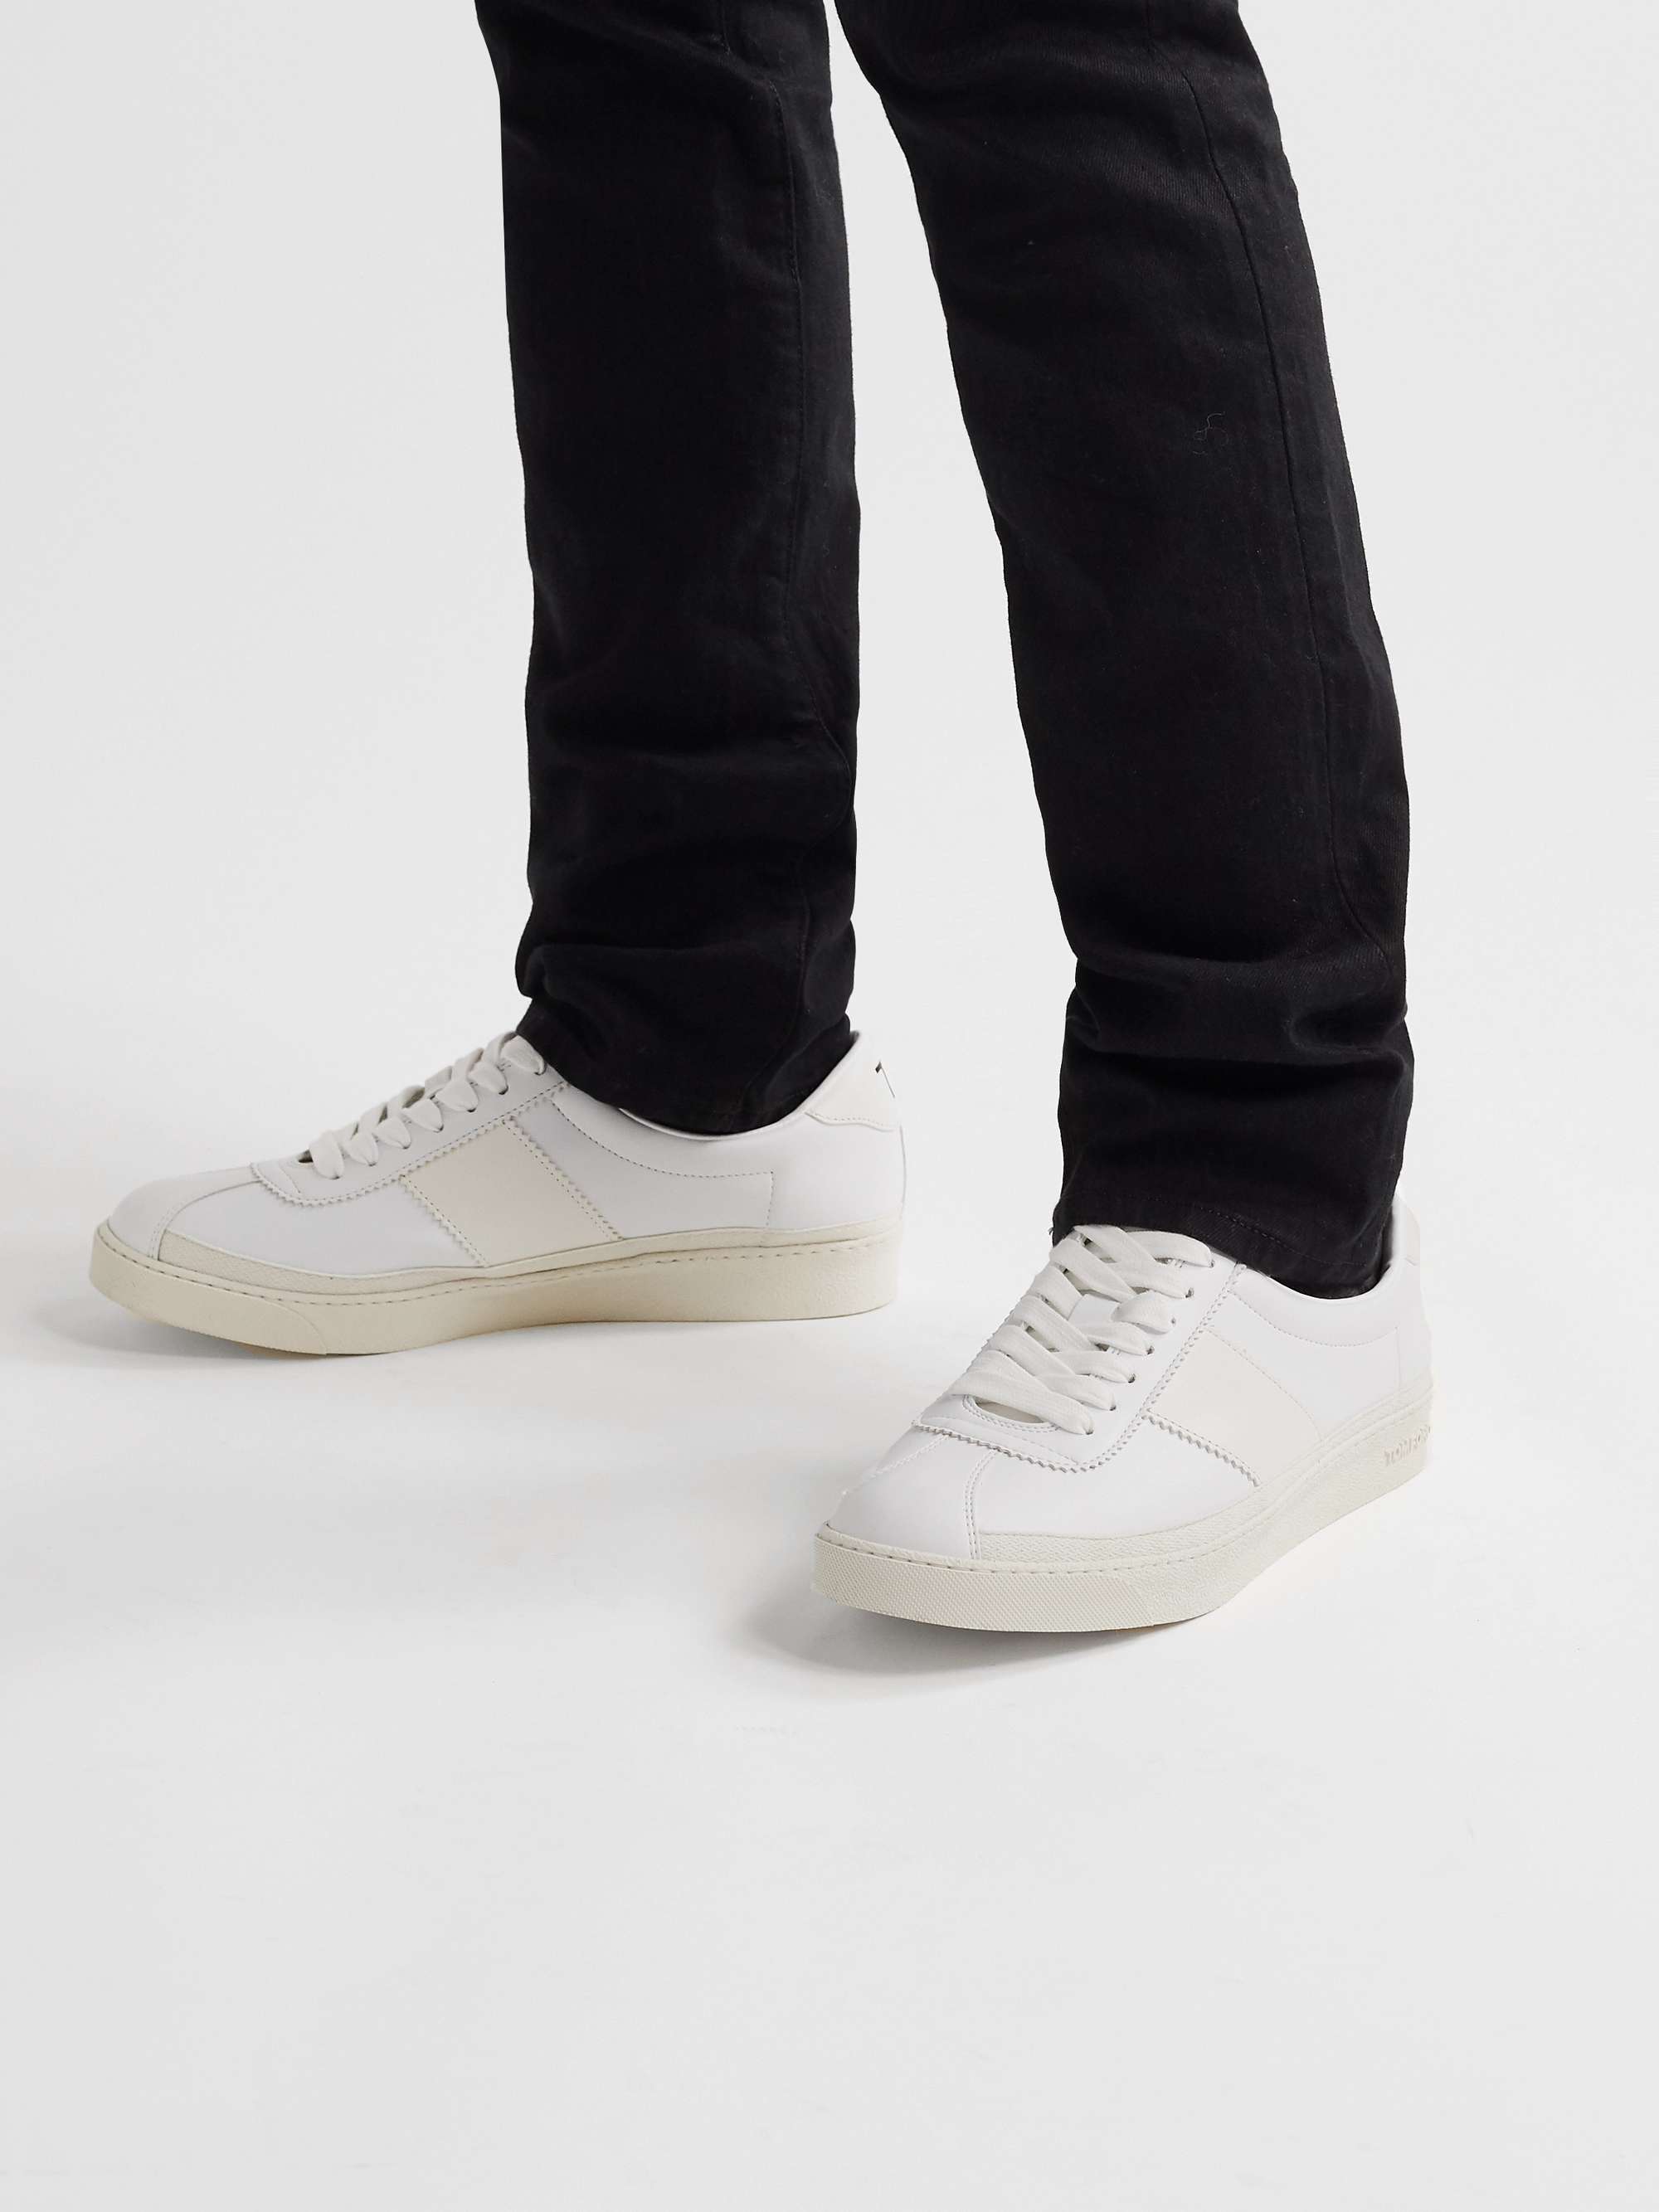 TOM FORD Bannister Leather Sneakers